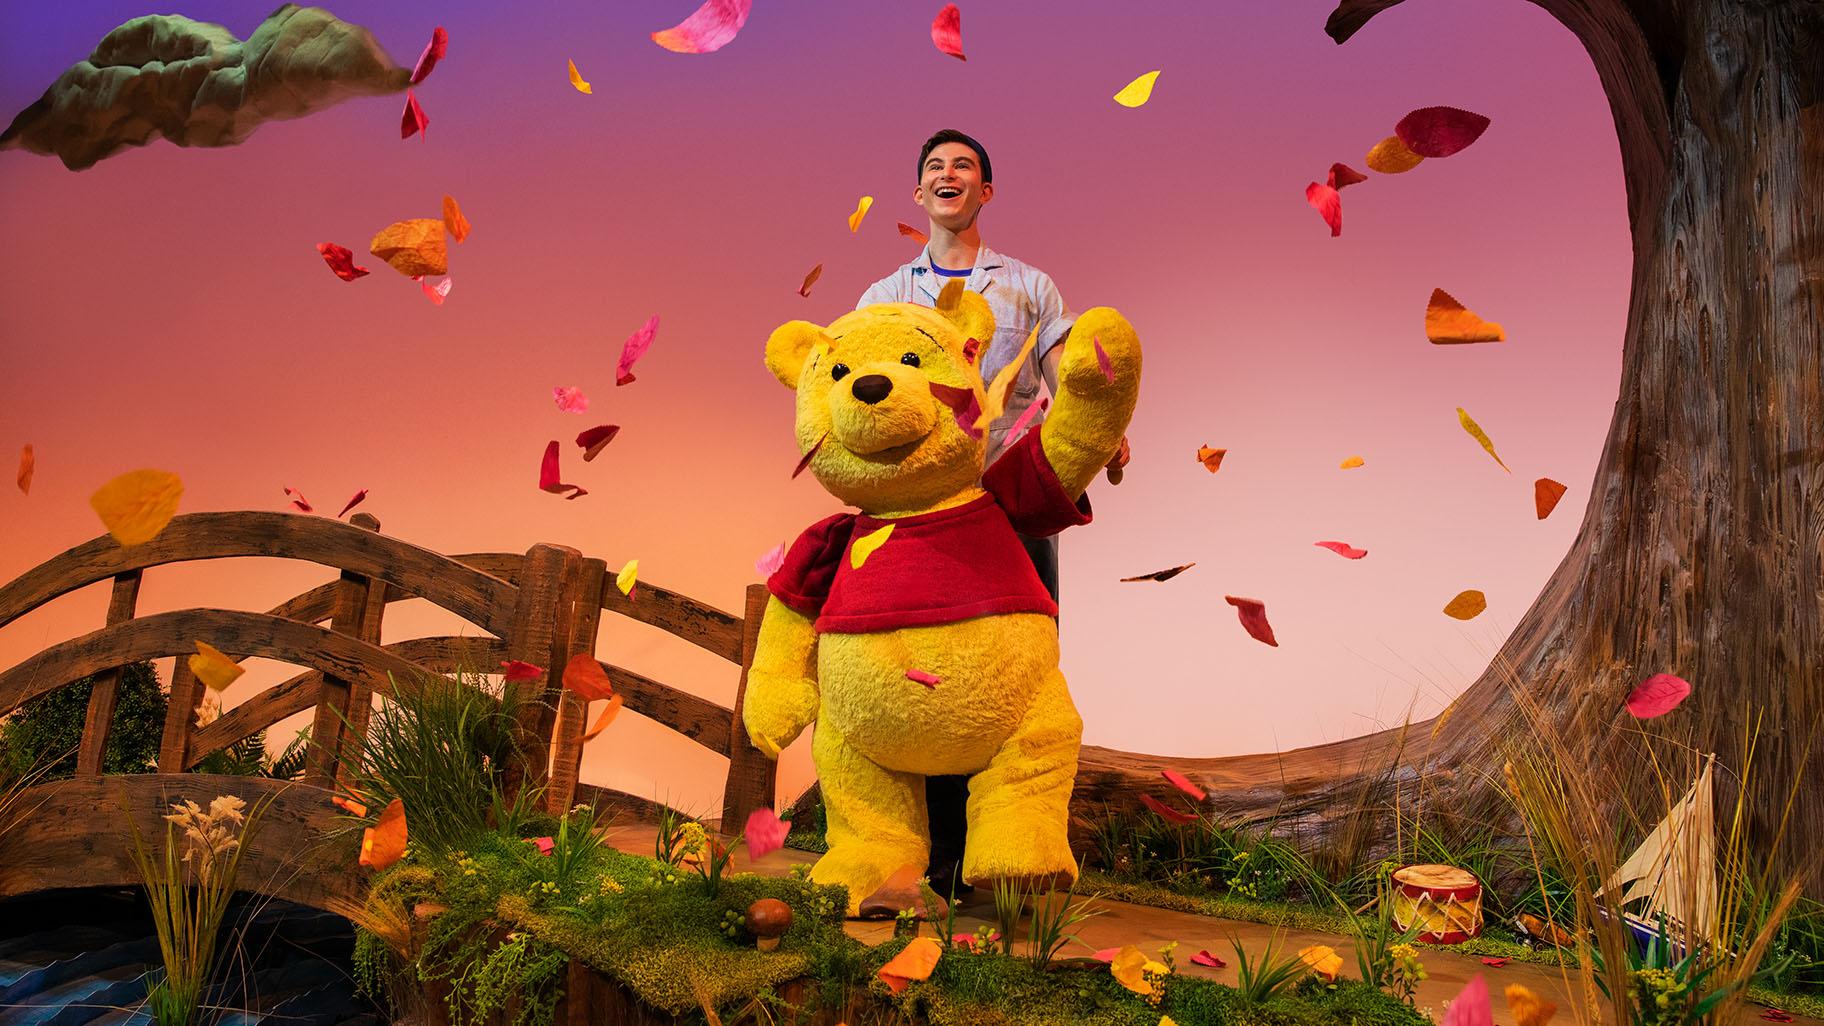 Piglets and Tigers and Bears, Oh My: A Playful Puppet Rendering of Disney's  “Winnie the Pooh” at Mercury Theater | Chicago News | WTTW